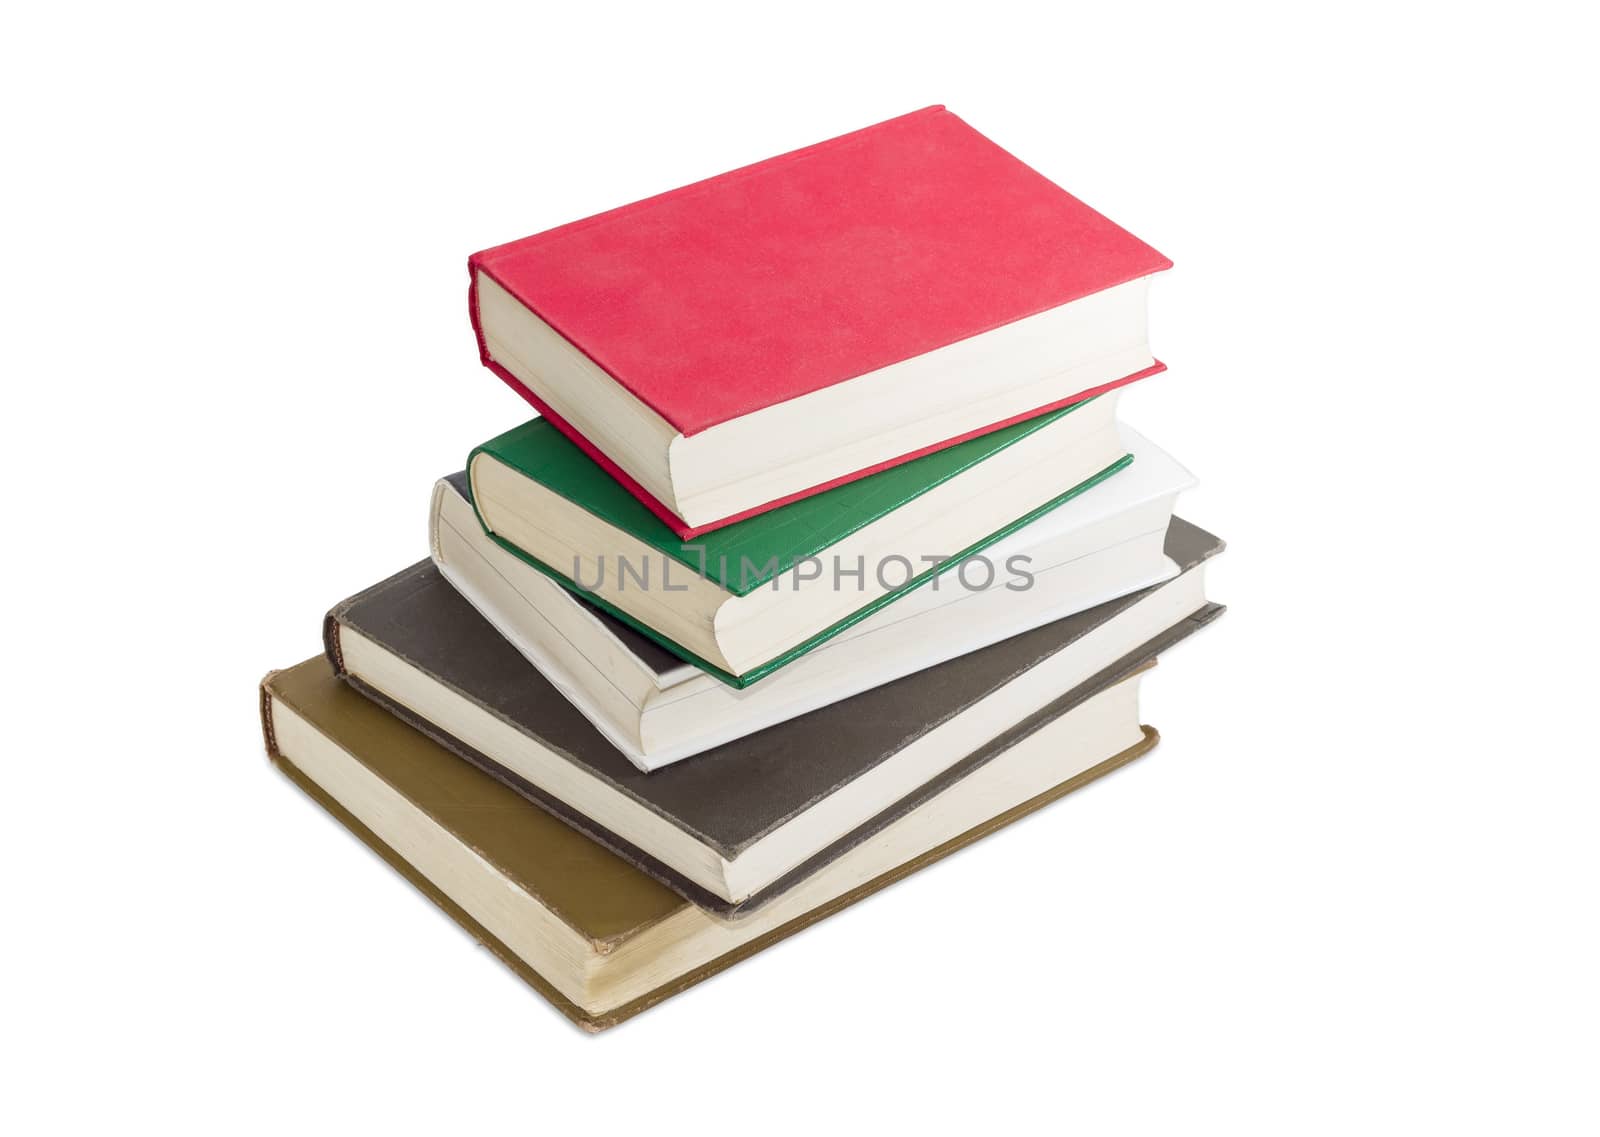 Stack of several books different formats and cover design on a light background
